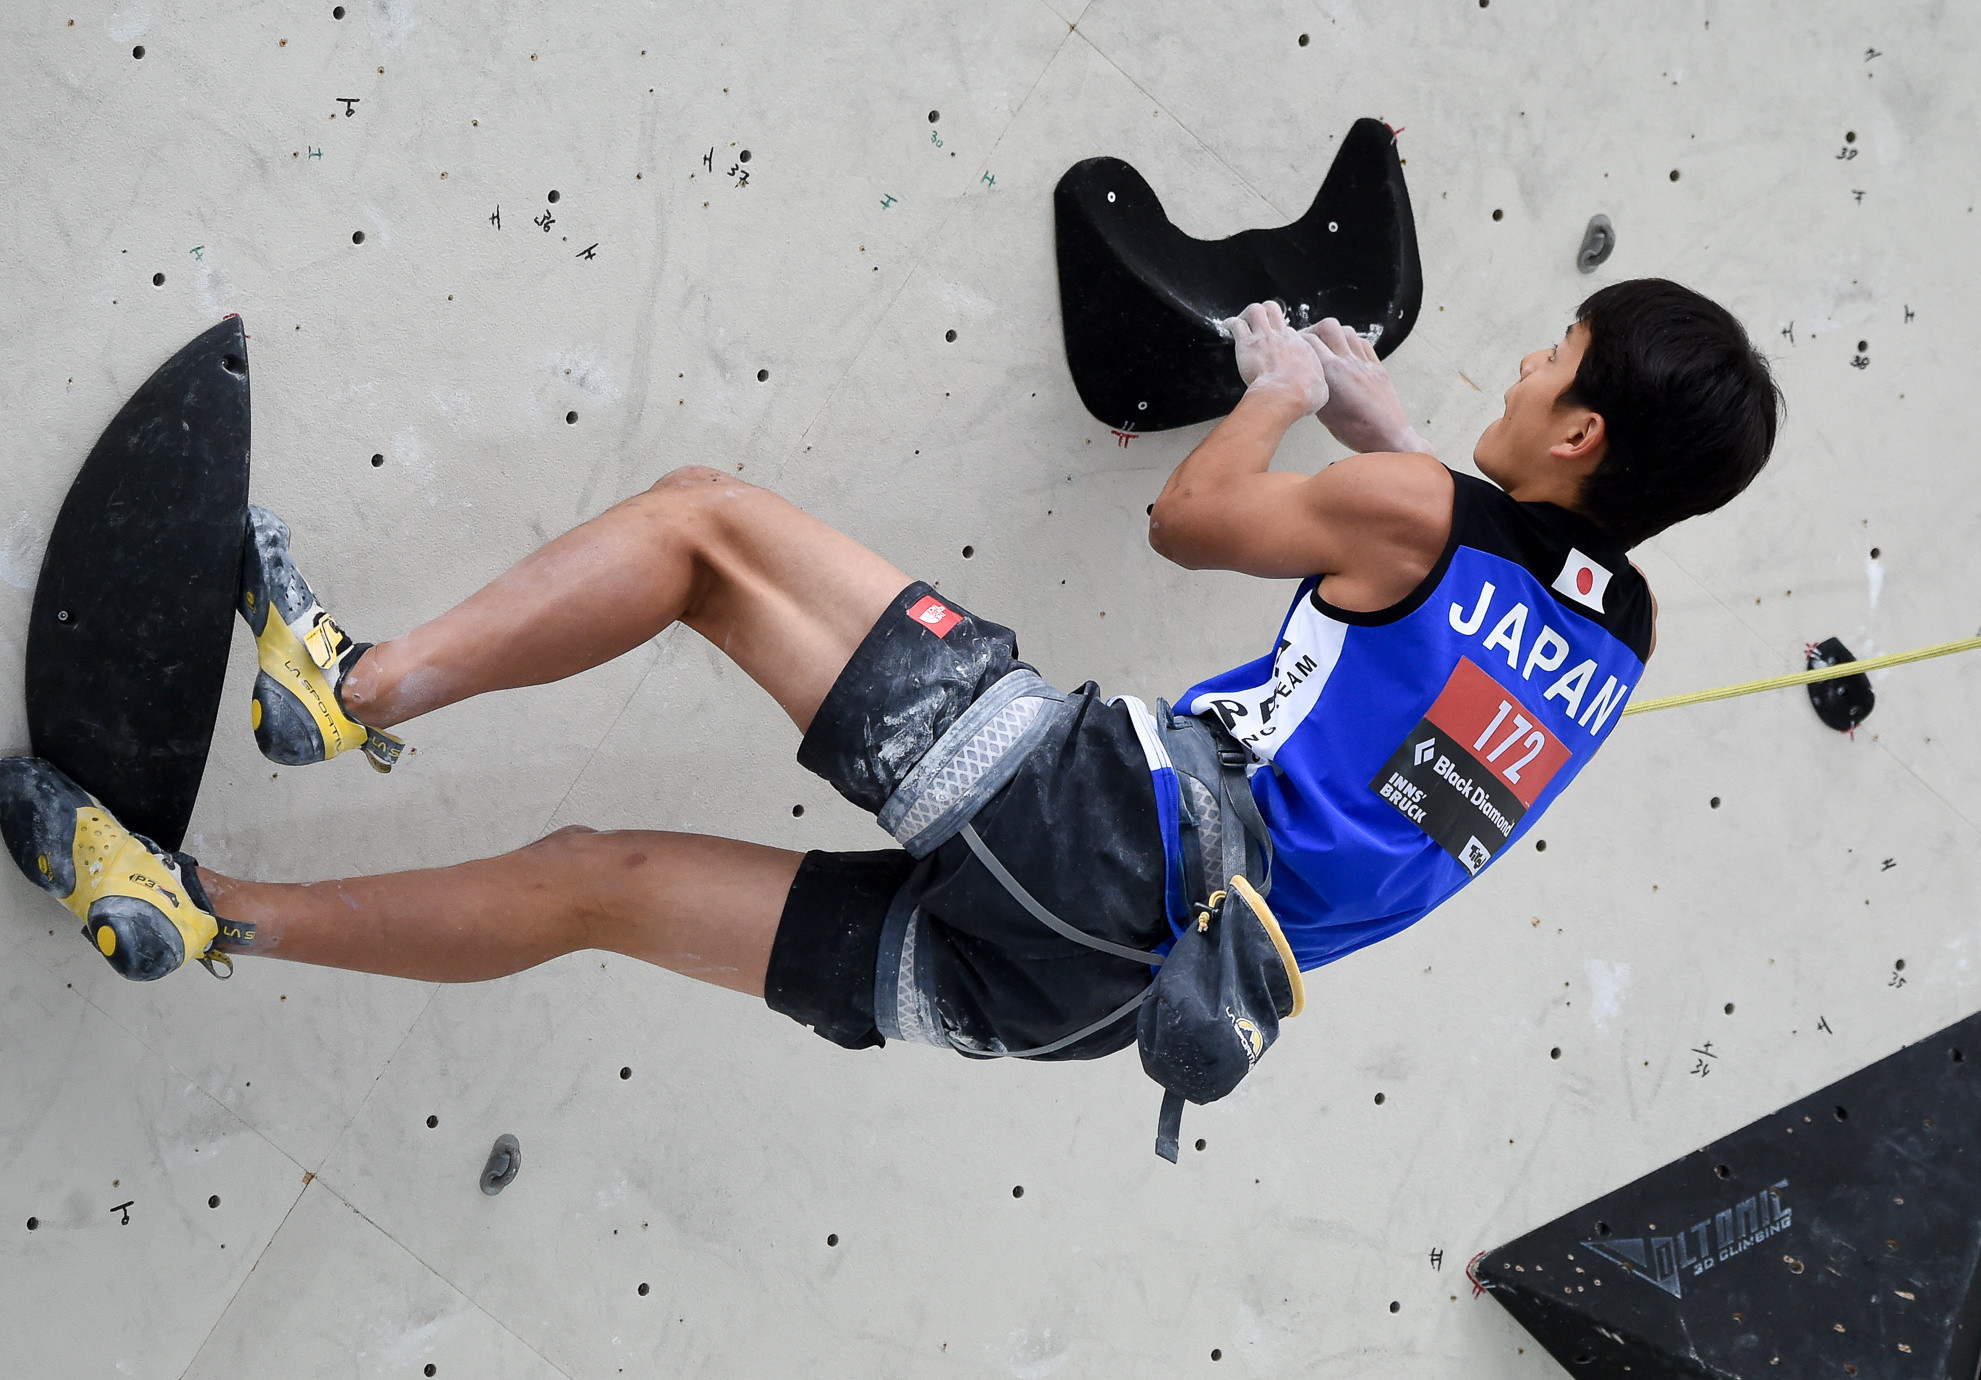 Japan win two of three golds on day three of IFSC Youth World Championships